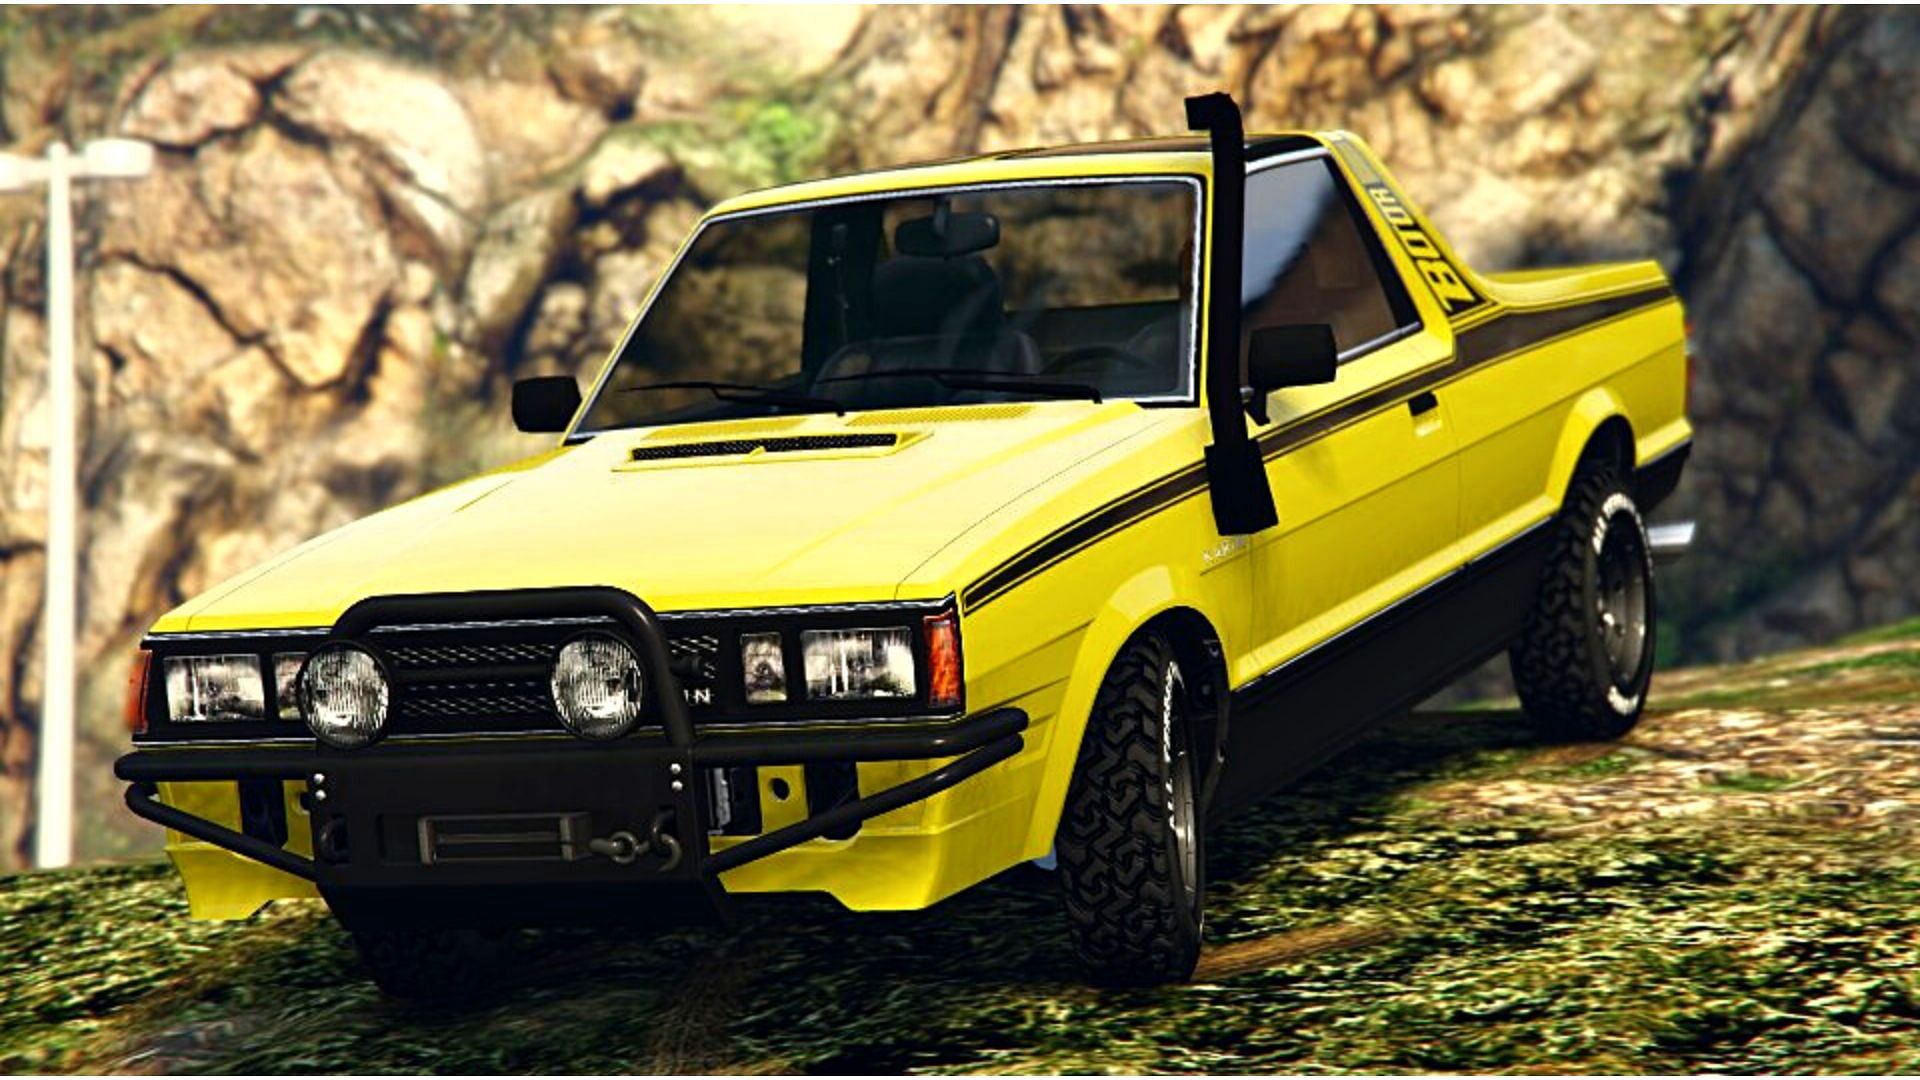 A brief report on the newly released Karin Boor car in GTA Online Last Dose update today by Rockstar Games (Image via crsN on GTAForums)